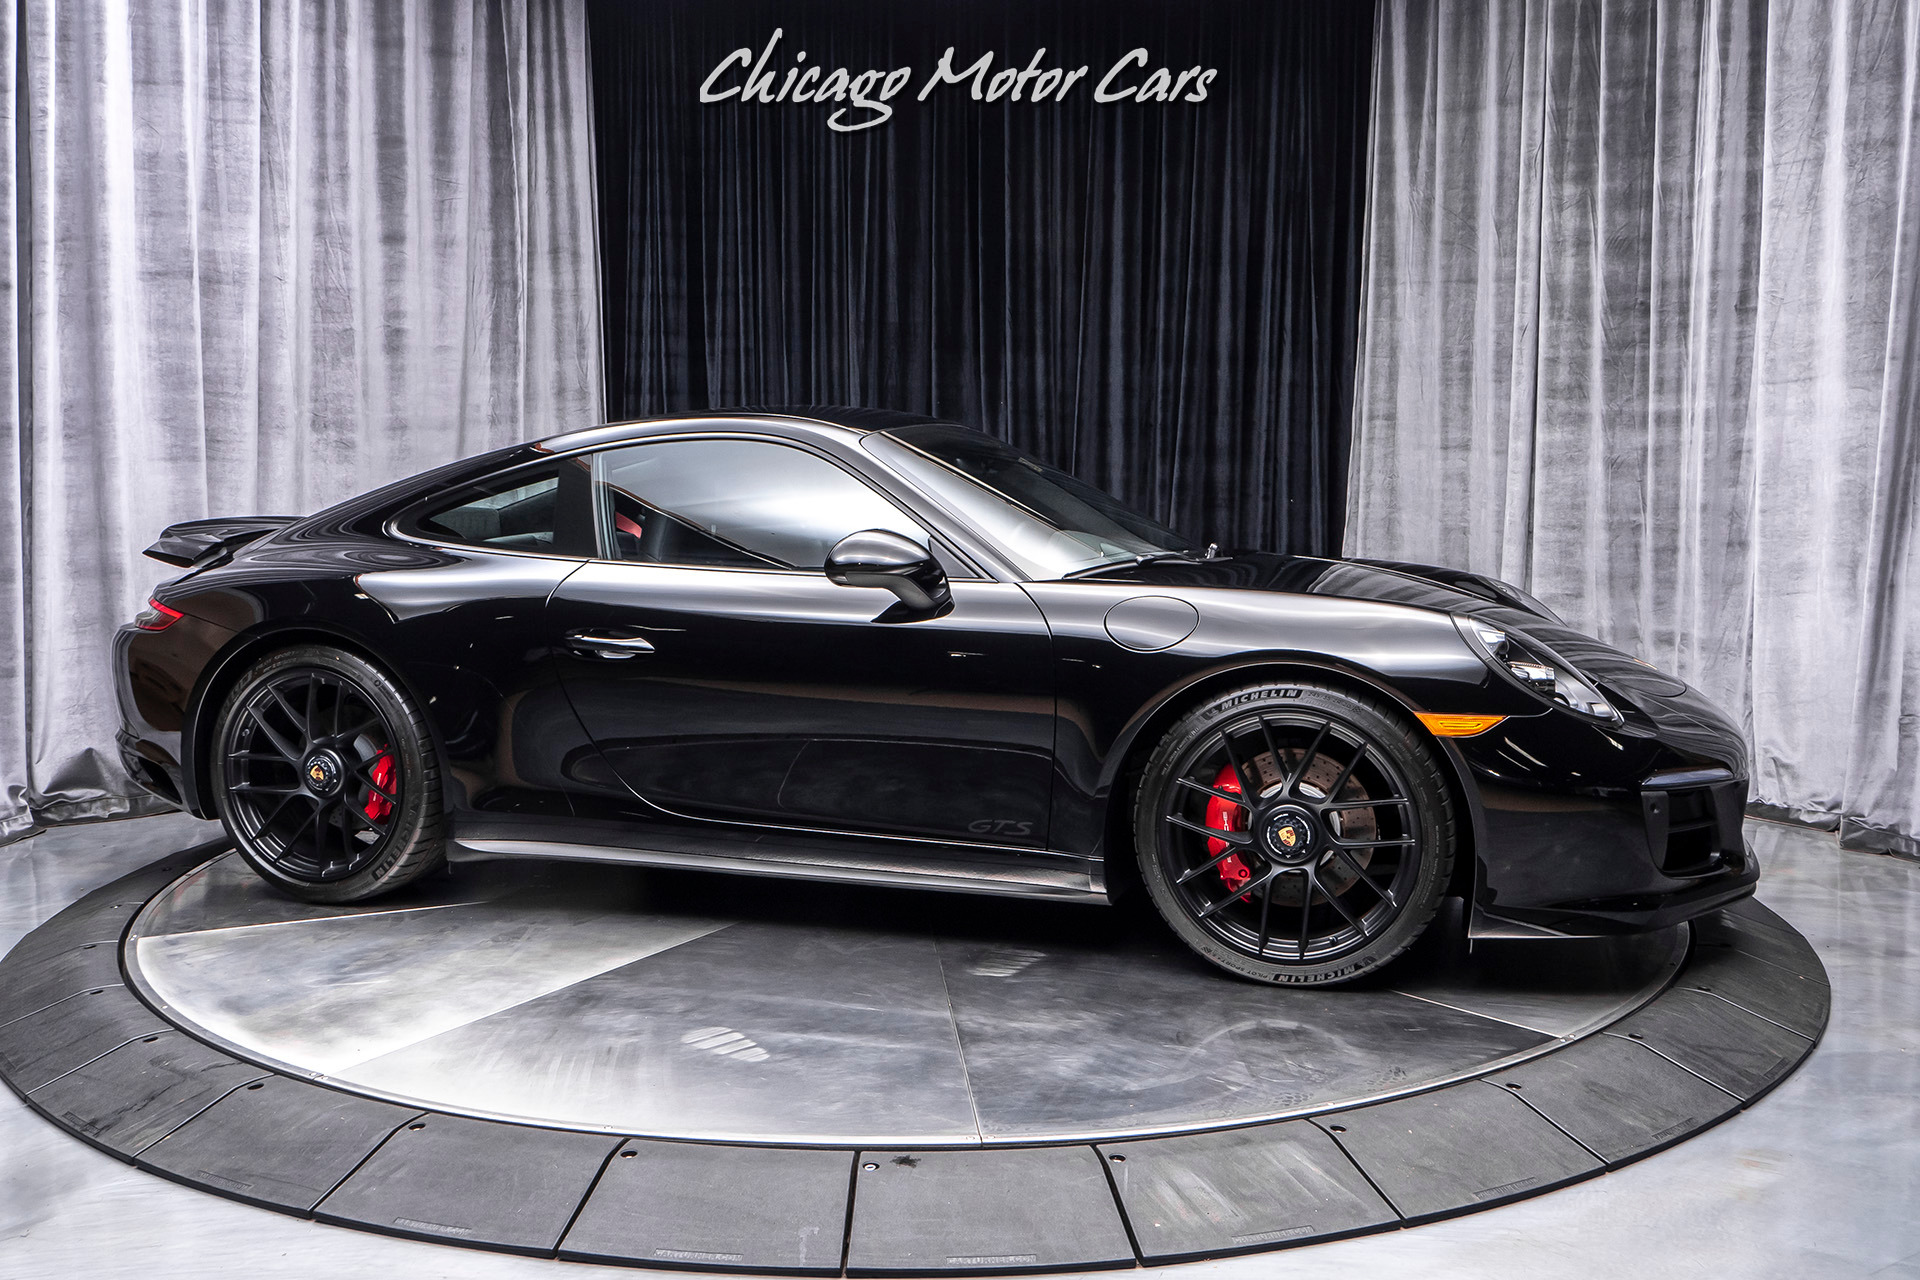 Used-2019-Porsche-911-Carrera-4-GTS-Coupe-MSRP-154K-PDK-LED-HEADLIGHTS